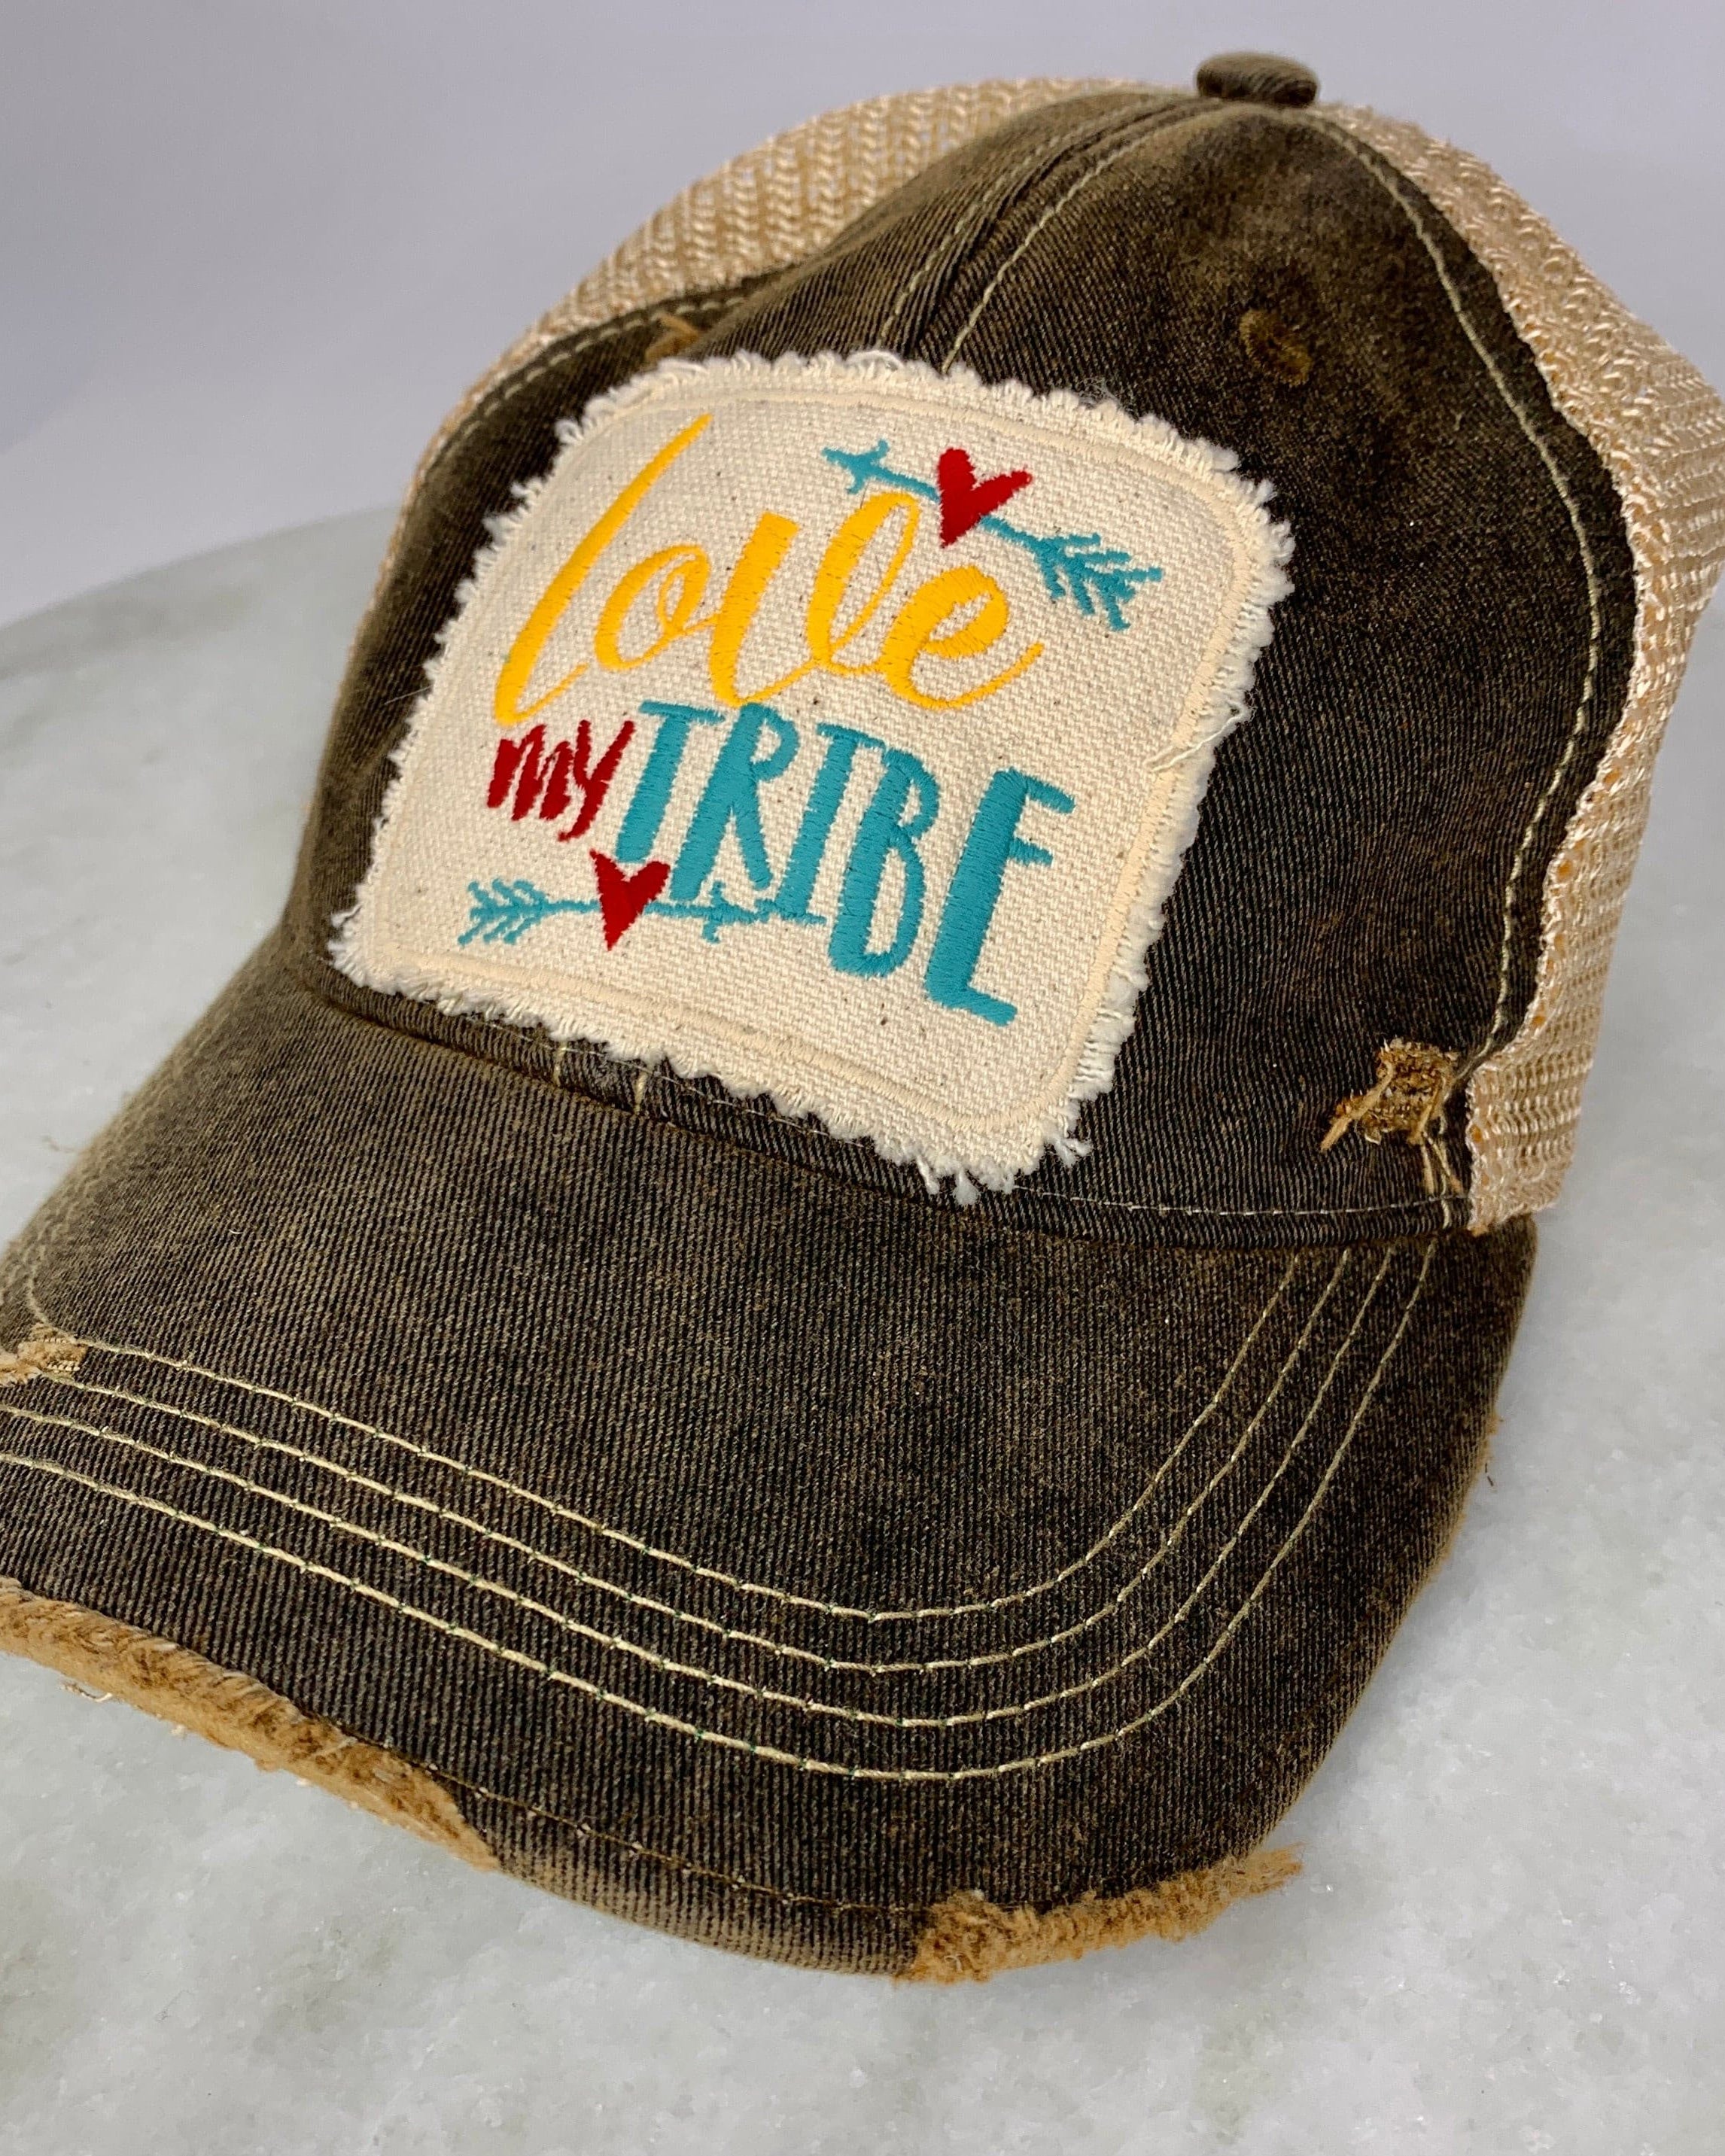 Assorted Love My Tribe Trucker Hats.